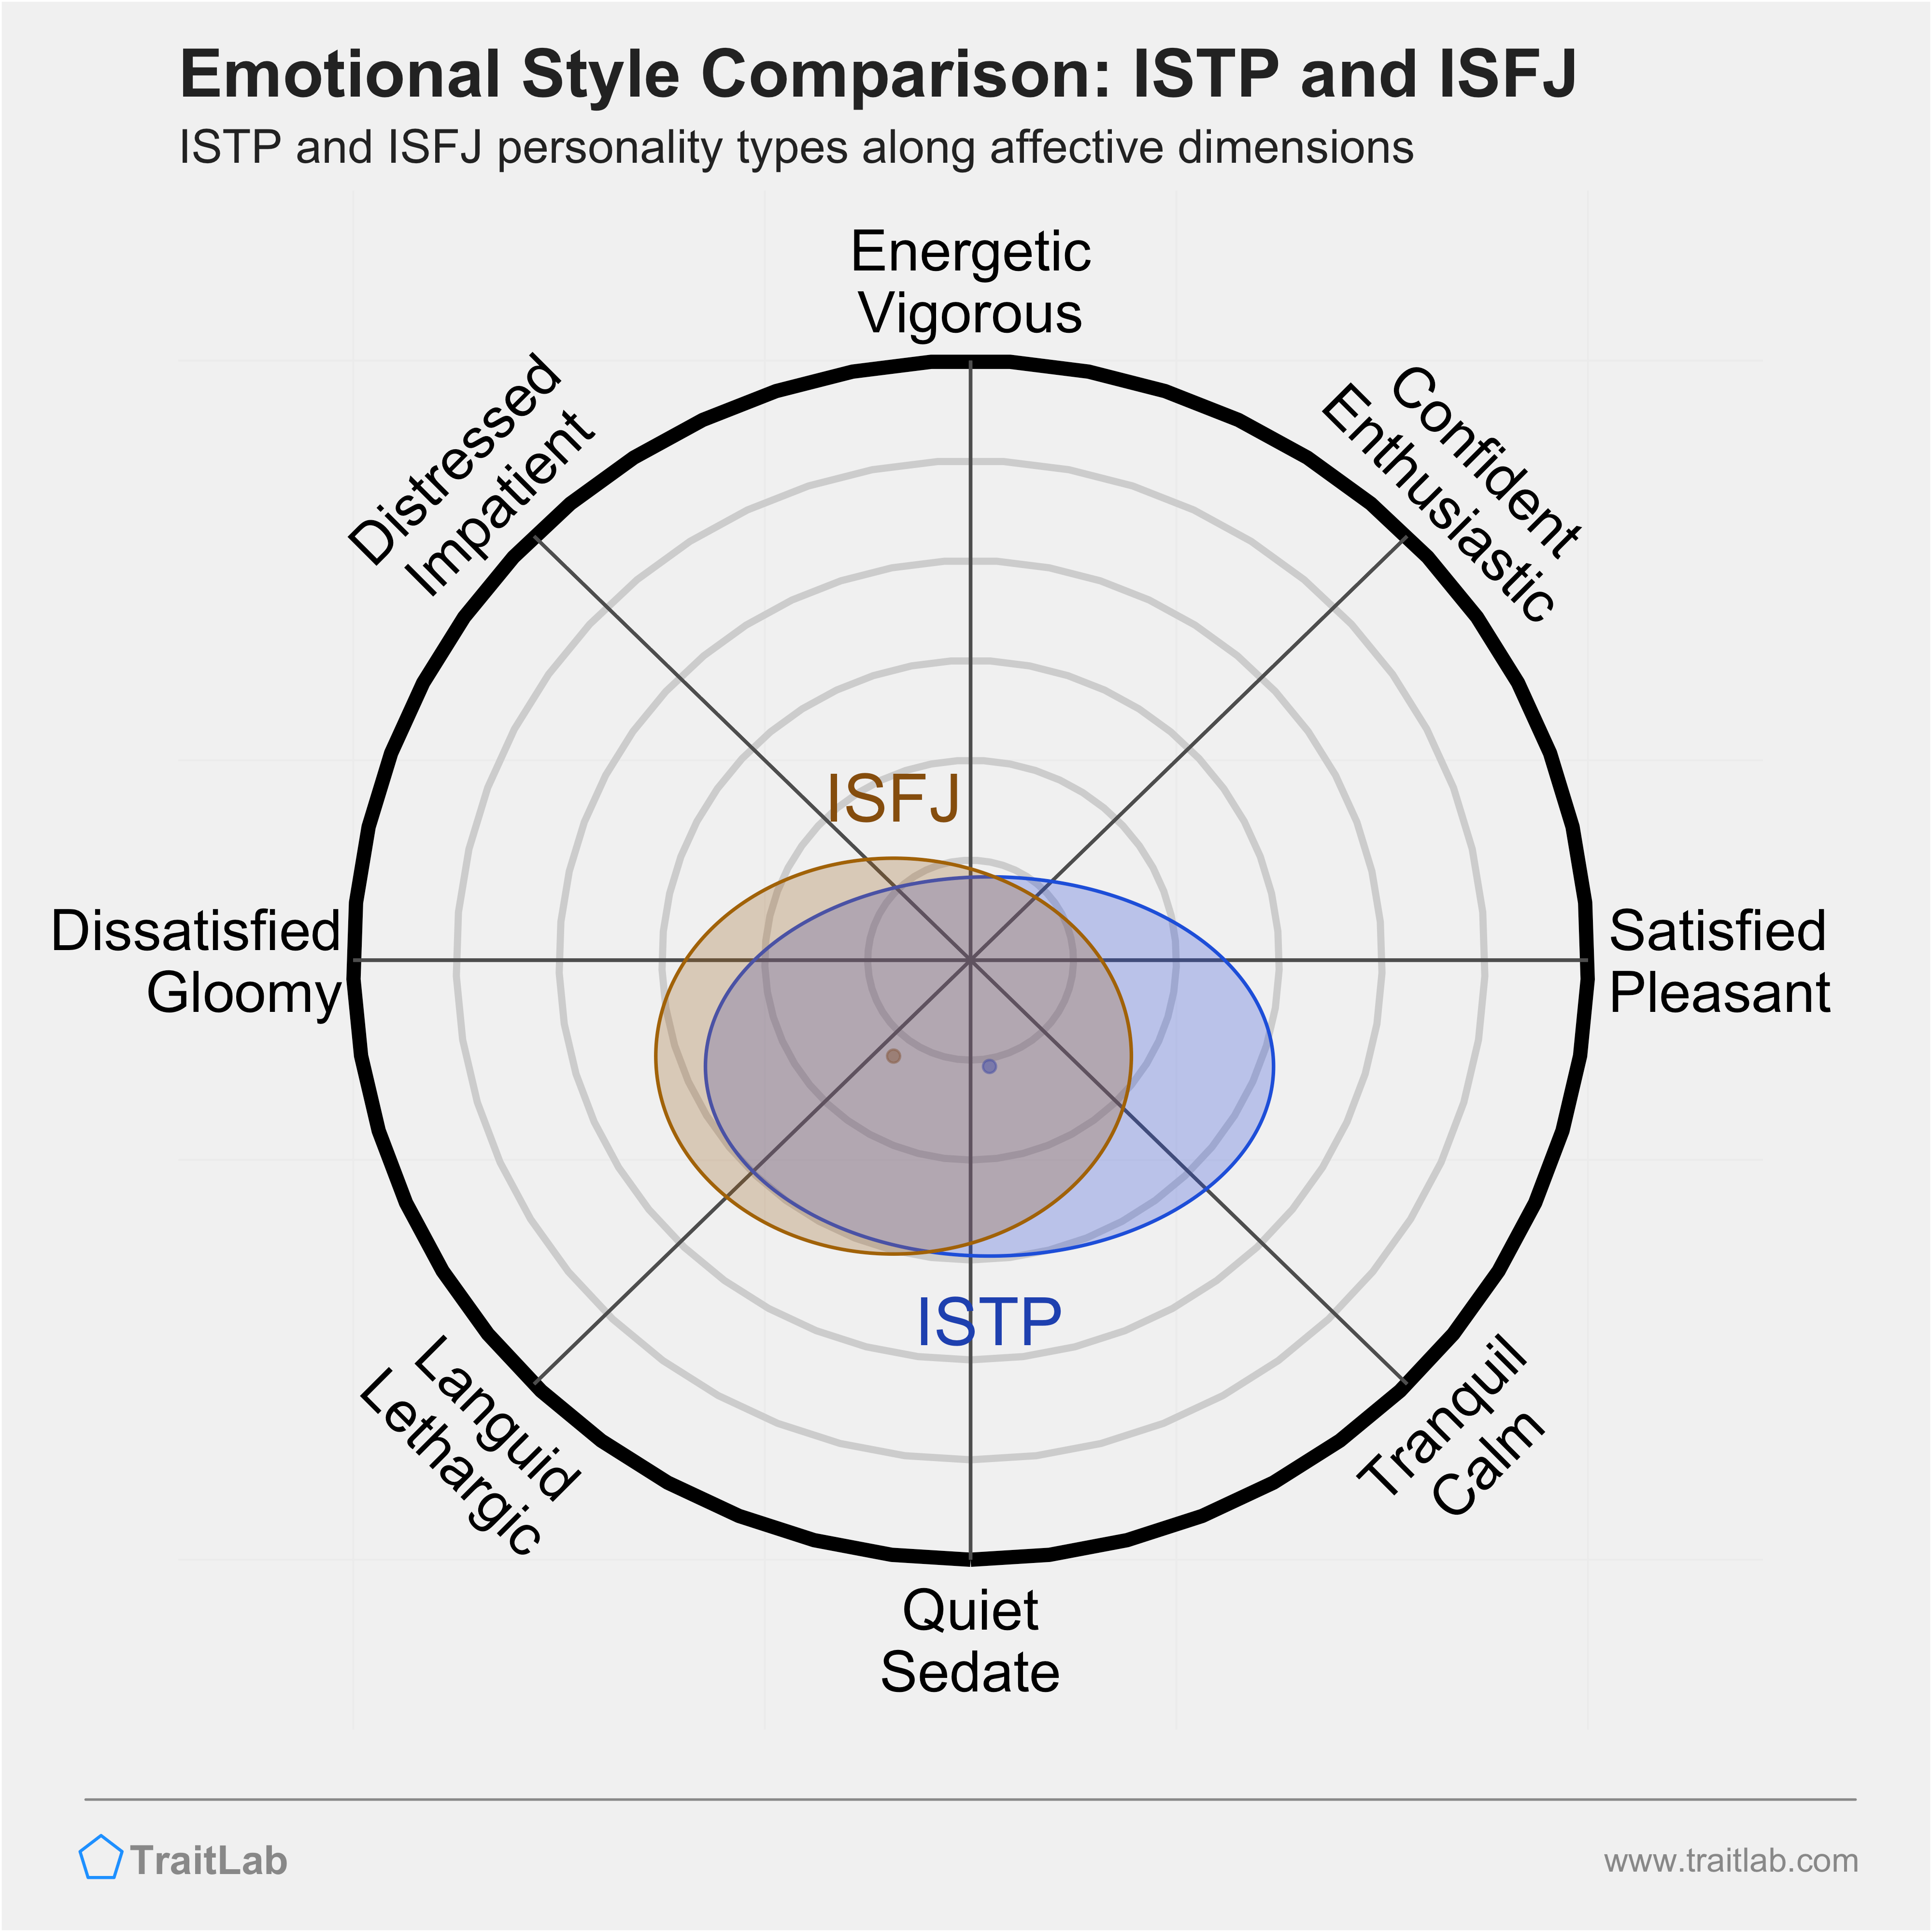 ISTP and ISFJ comparison across emotional (affective) dimensions